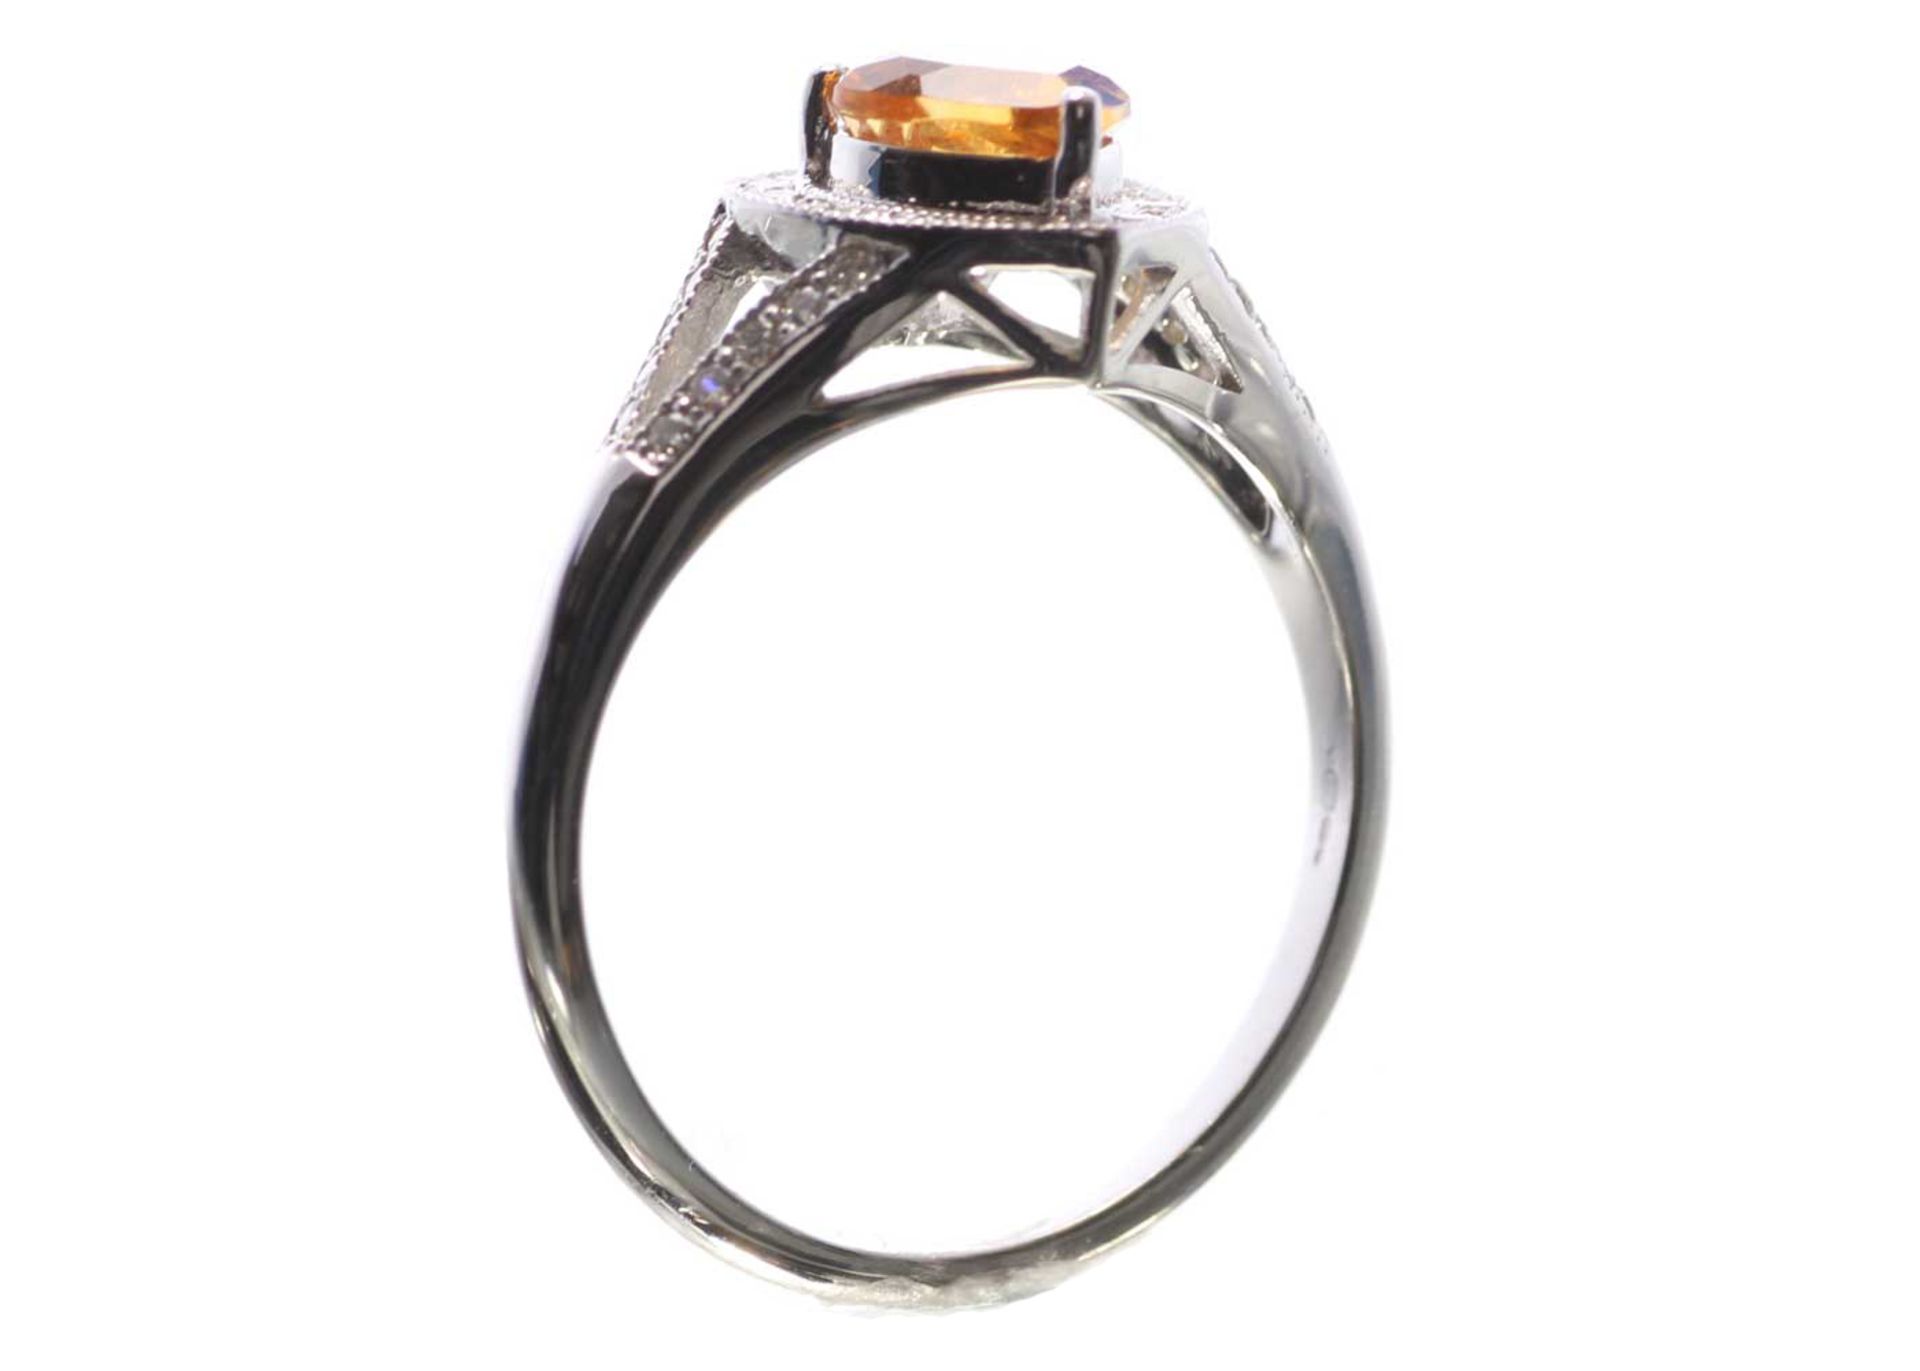 9ct White Gold Heart Shape Citrine Diamond Ring 0.20 Carats - Valued by AGI £1,495.00 - 9ct White - Image 3 of 4